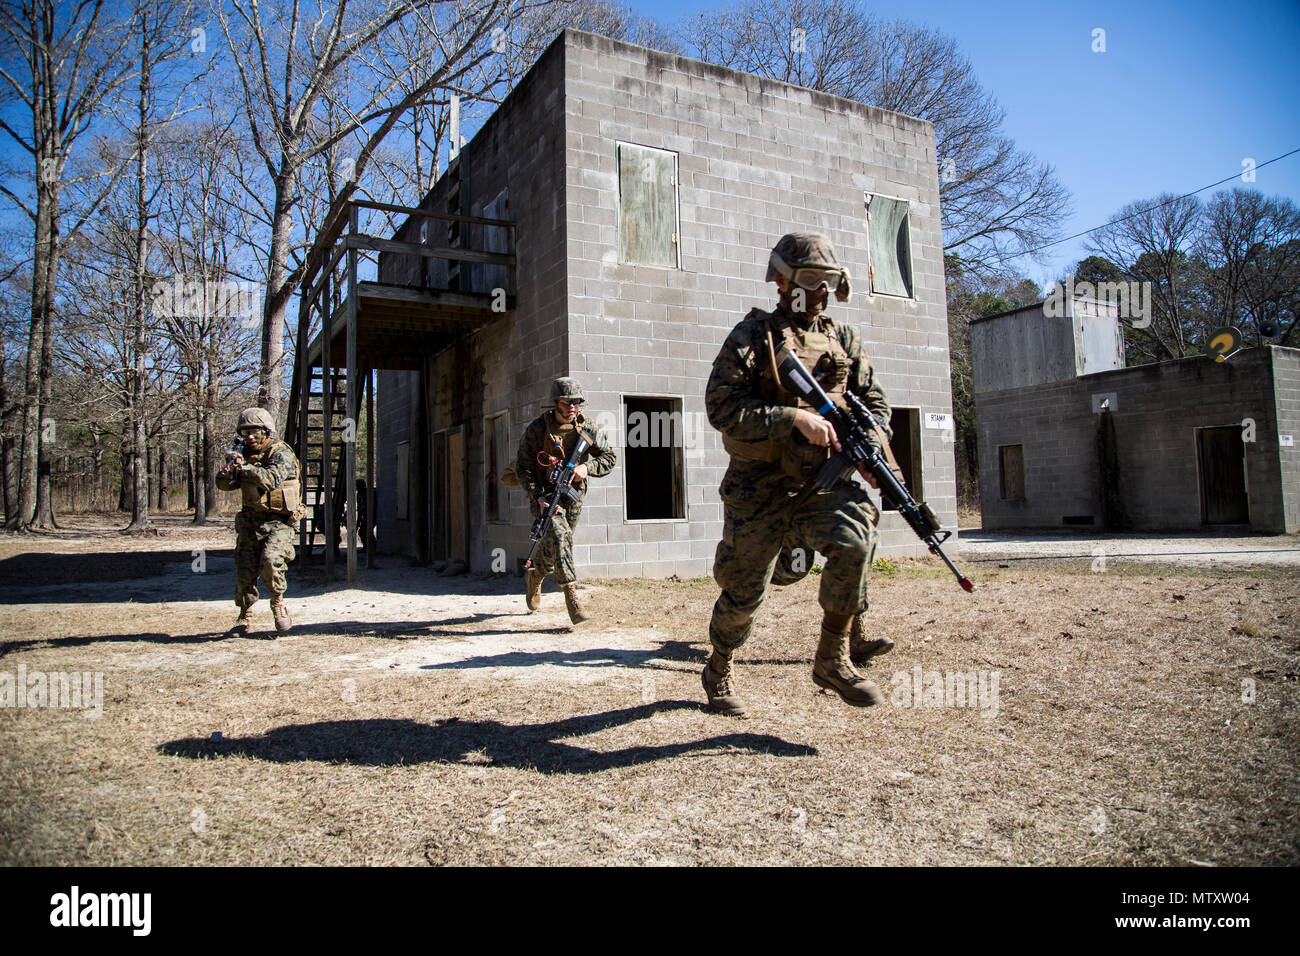 U.S. Marines with Company F (Fox Co.), Marine Combat Training Battalion (MCT), School of Infantry-East conduct Military Operations in Urban Terrain during their Basic Skills Readiness Exercise (BSRE) aboard Camp Geiger, N.C., Jan. 31, 2017. U.S. Marines attending MCT go through BSRE, a 24 hour evaluation testing them in all the skills that they have learned while in training. (U.S. Marine Corps photo by Lance Cpl. Jose Villalobosrocha) Stock Photo